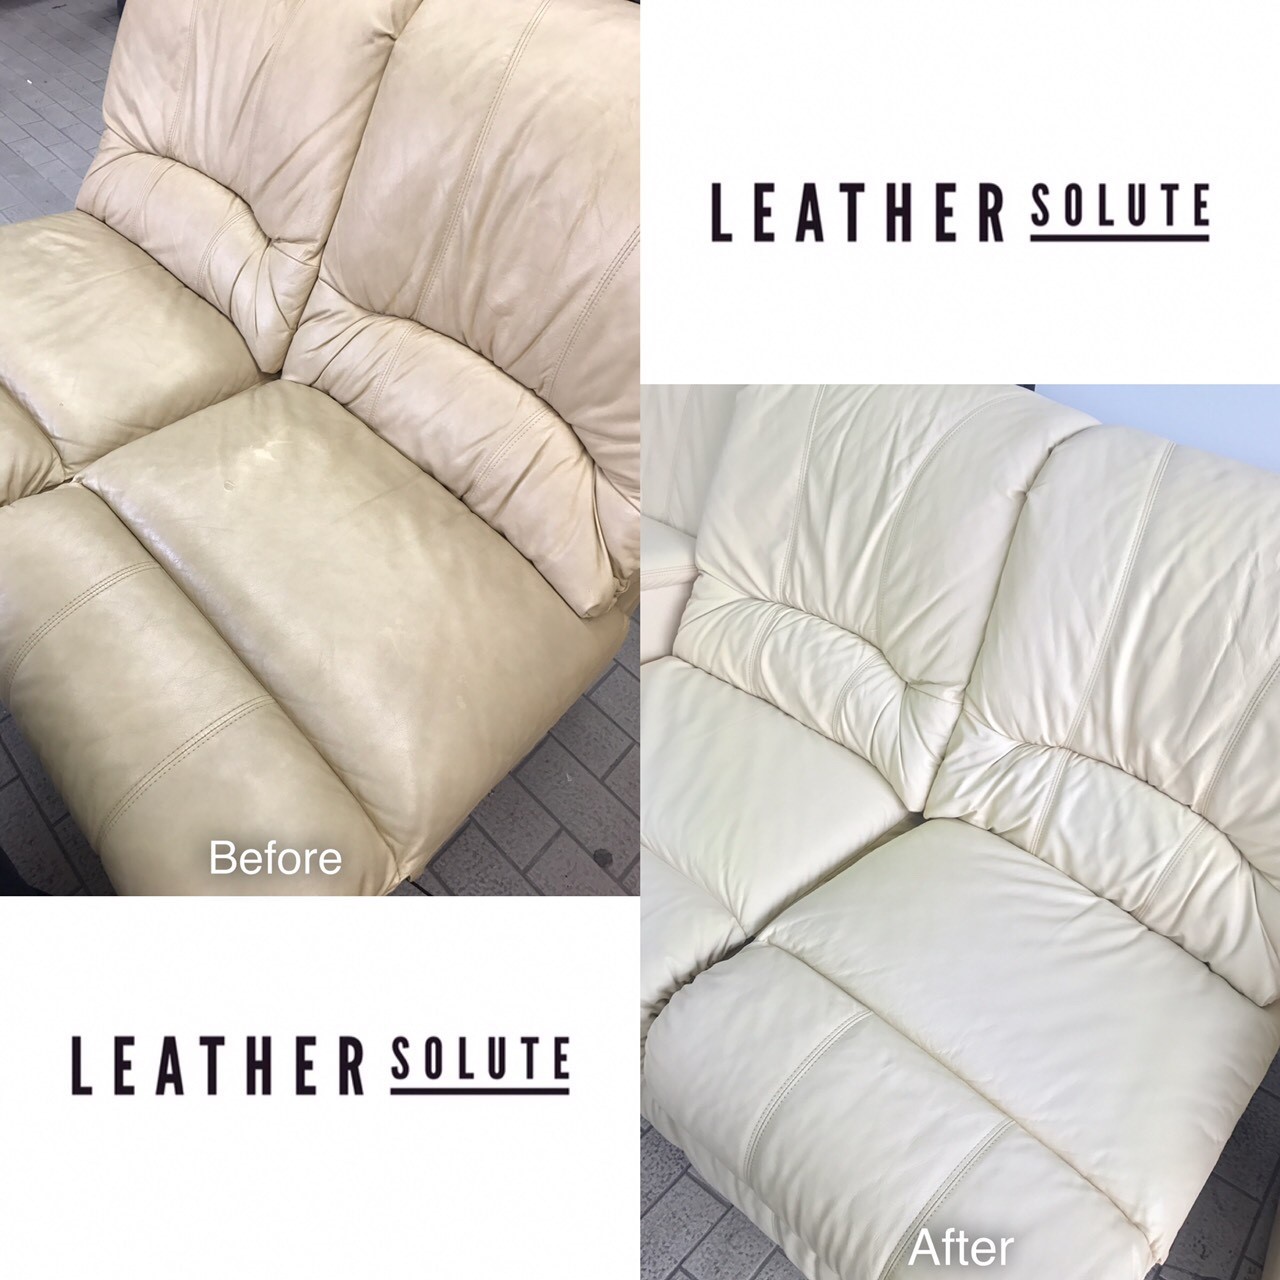 //www.leathersolute.co.th/wp-content/uploads/2018/12/Cleaning-furniture_๑๘๑๒๓๐_0008.jpg